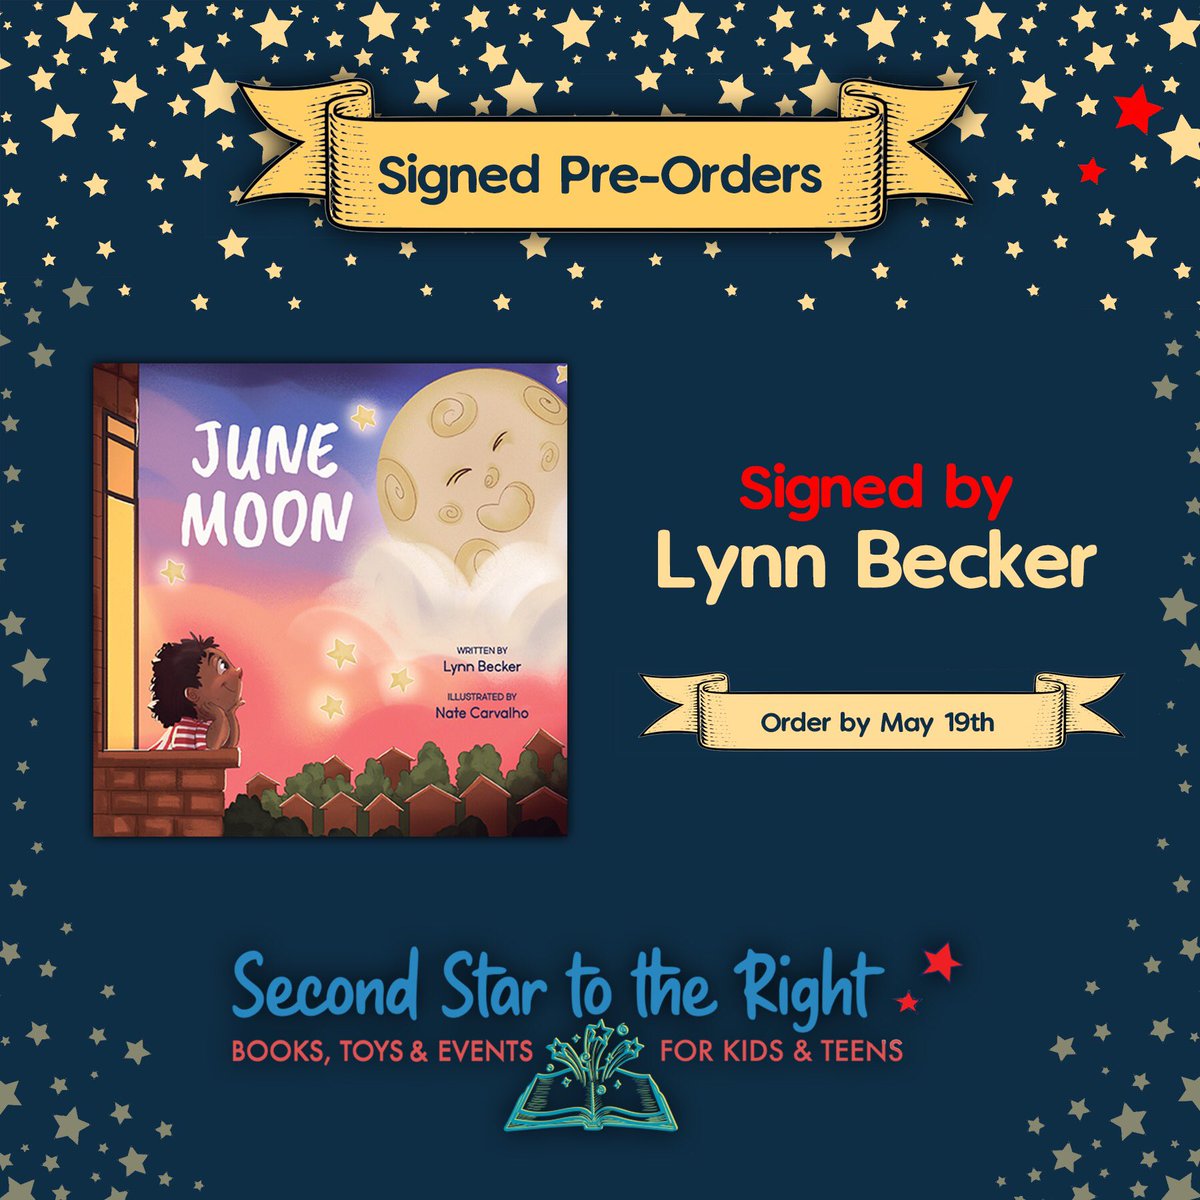 My new board book is almost here! Please consider preordering signed copies of June Moon, written by me and beautifully illustrated by Nate Carvalho, from fabulous indie bookstore Second Star to the Right in Denver. Many thanks! secondstartotherightbooks.com/book/978164170… @picturebookgold